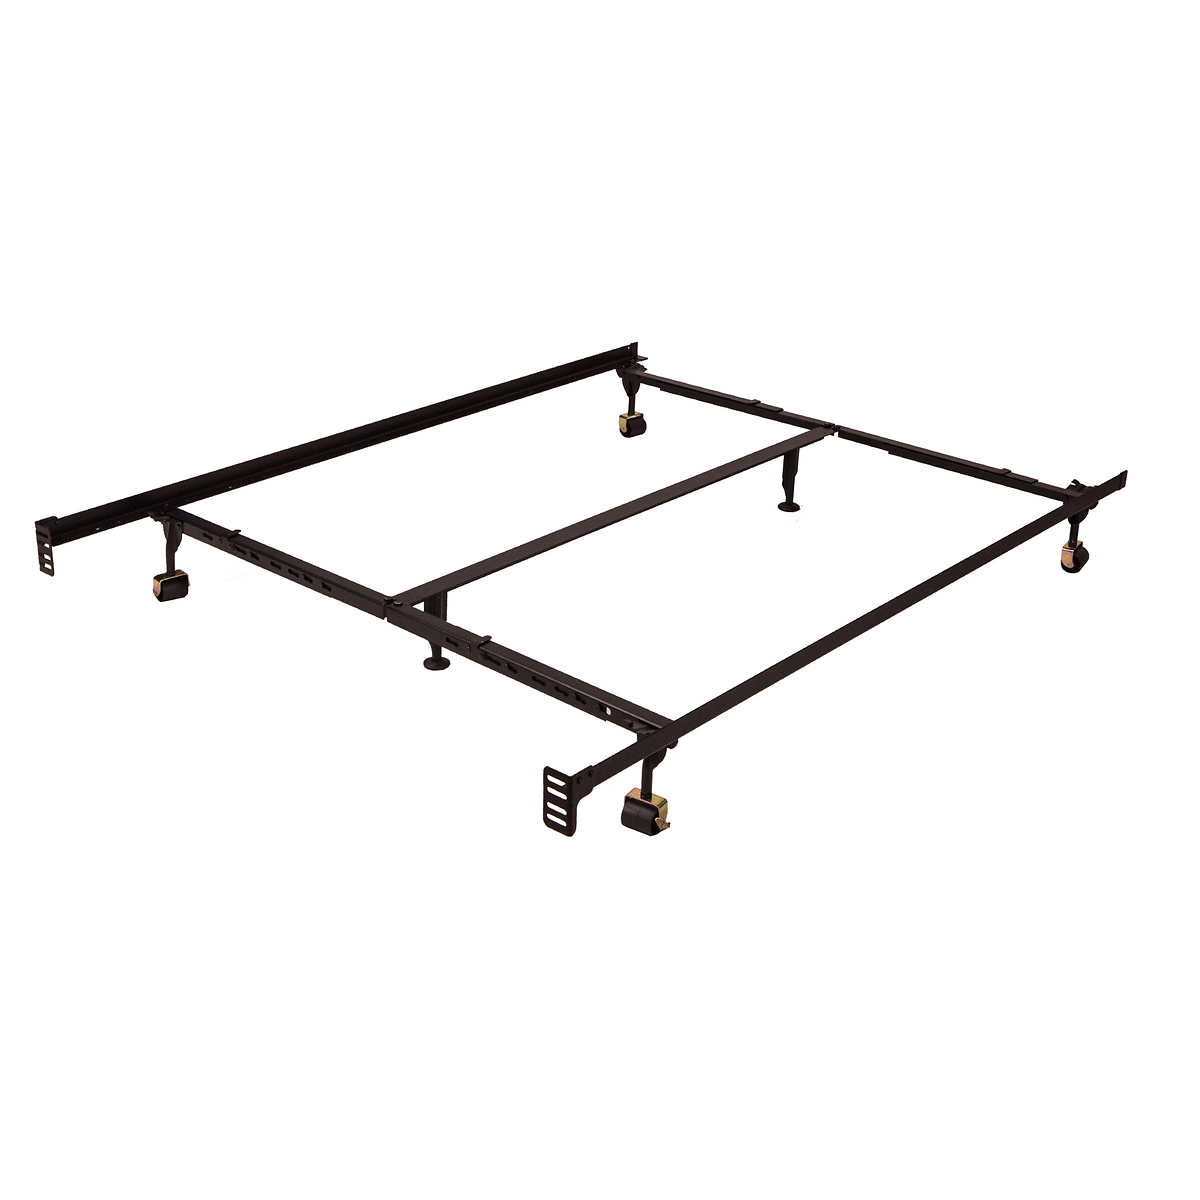 Premium Universal Lev R Lock Bed Frame, How To Put Together A Metal Bed Frame Queen